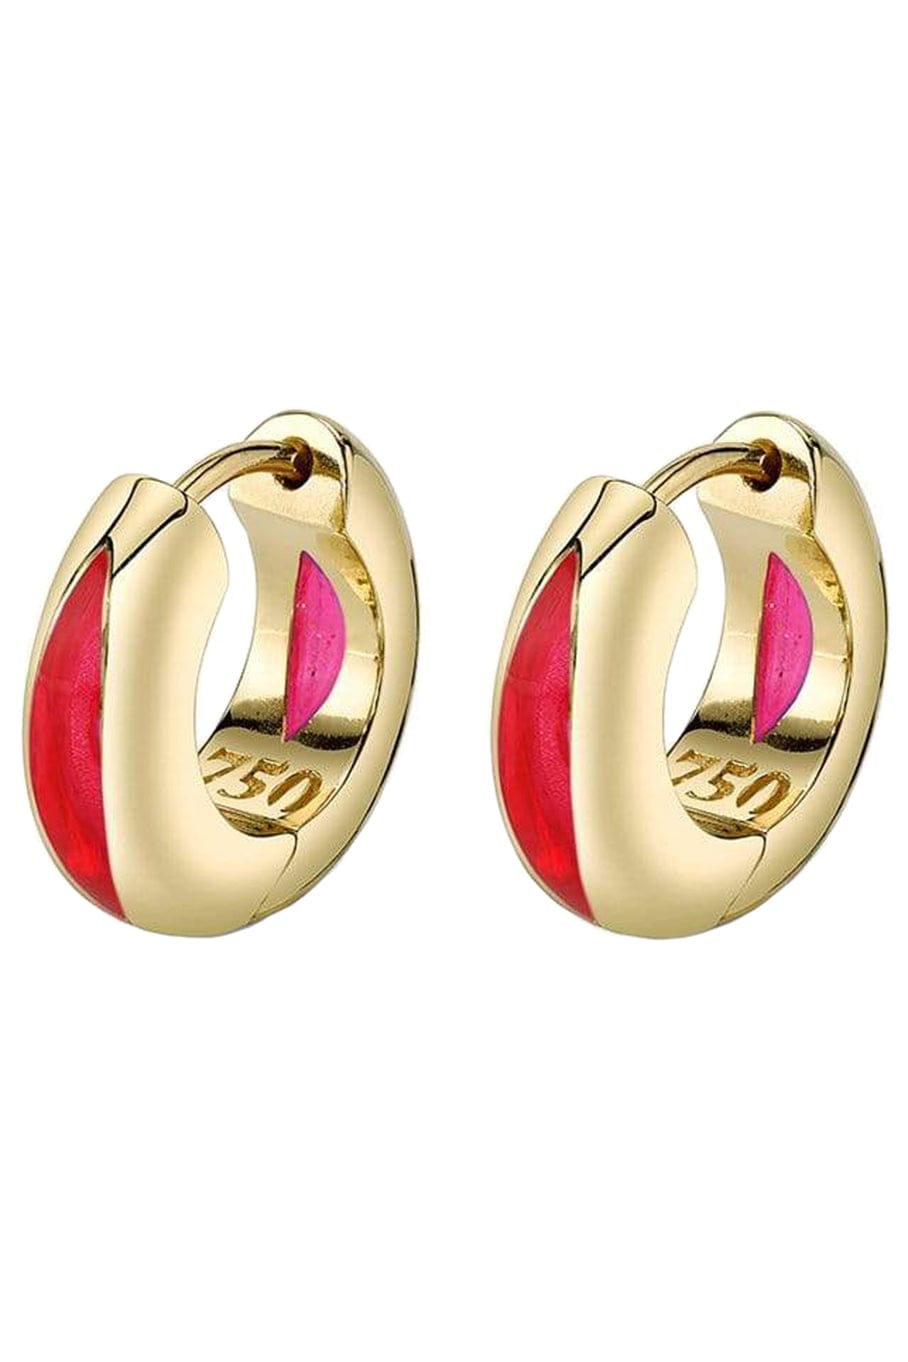 ANDY LIF-Red Enamel Perfect Huggies-YELLOW GOLD